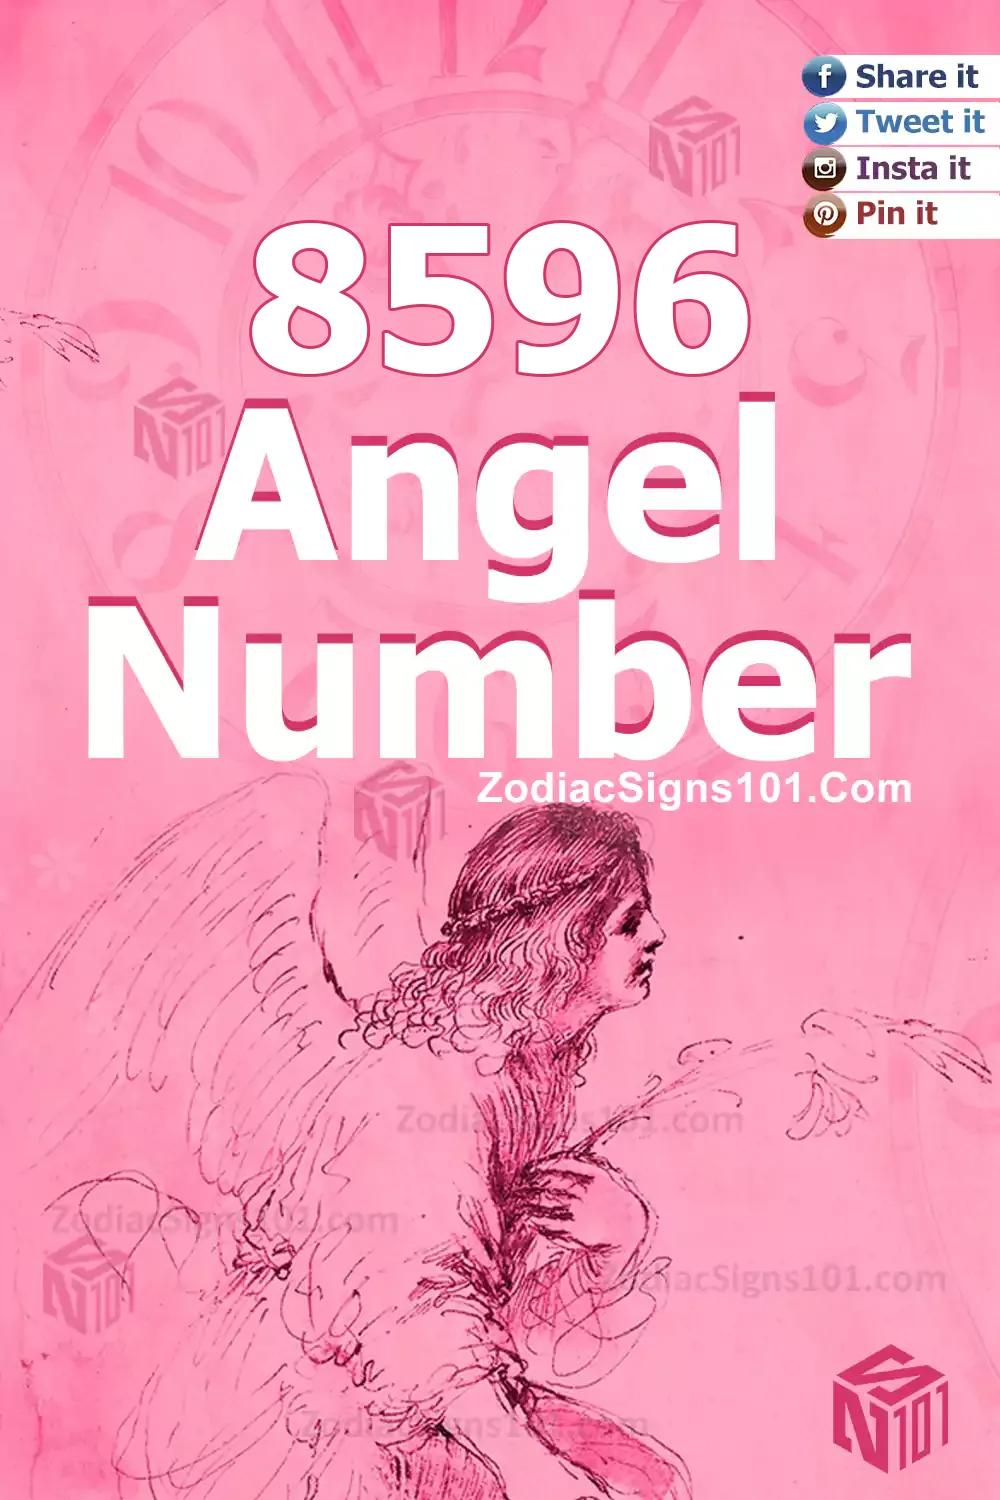 8596 Angel Number Meaning